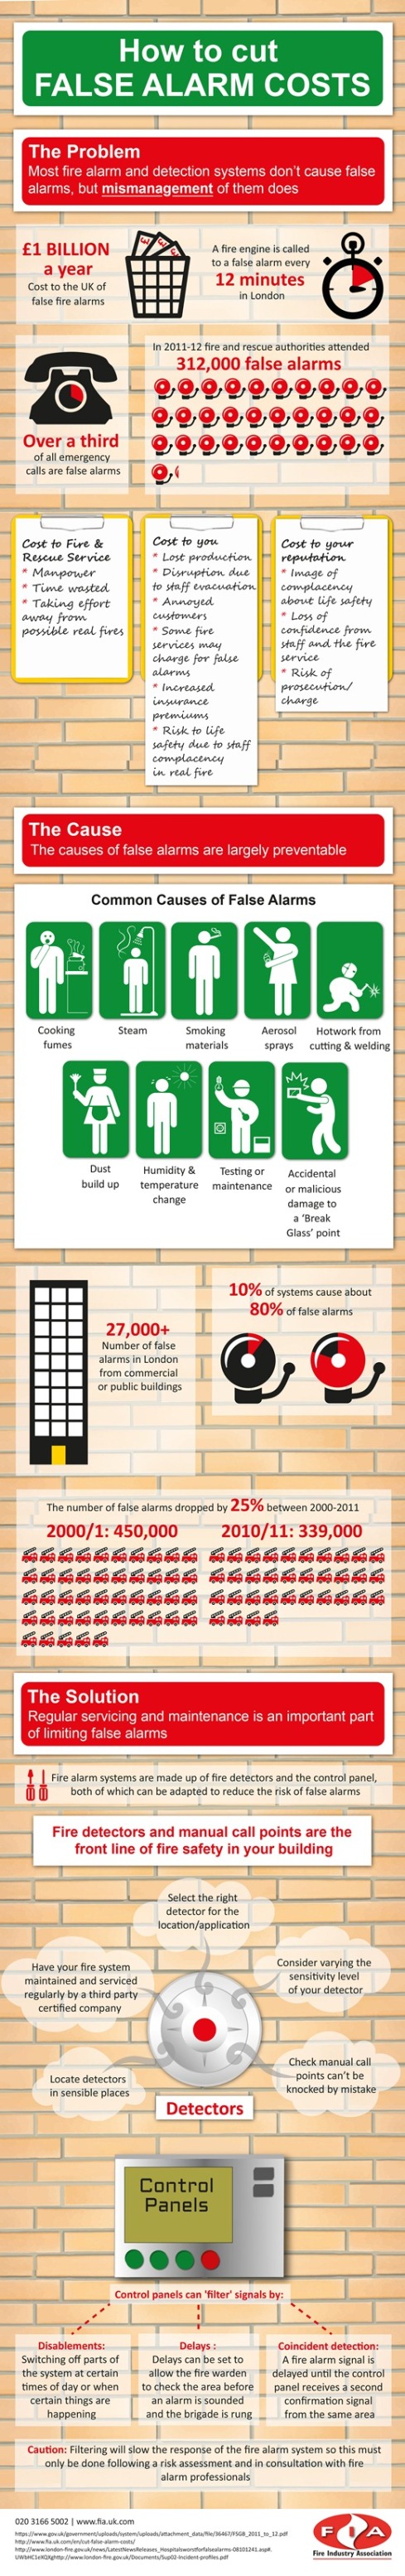 How to Cut False Alarms Infographic